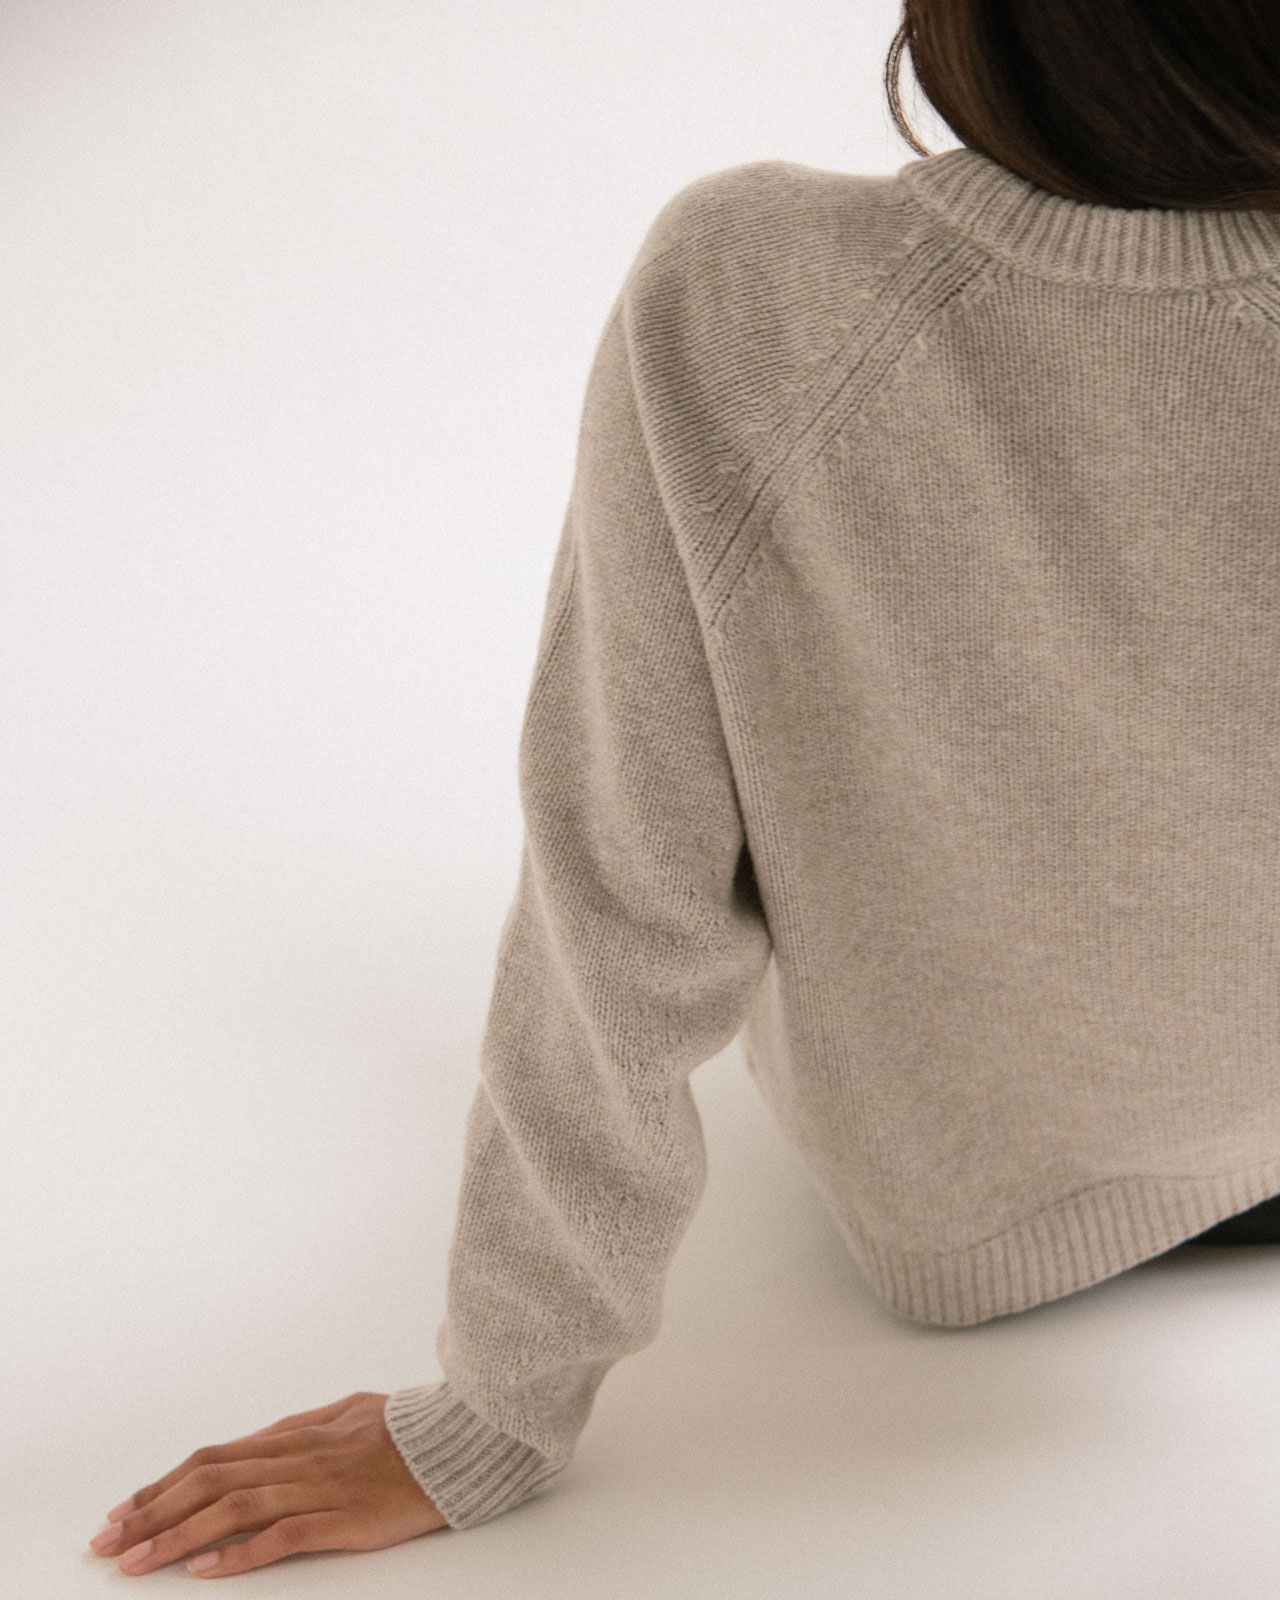 For The Everyday with Filippa K